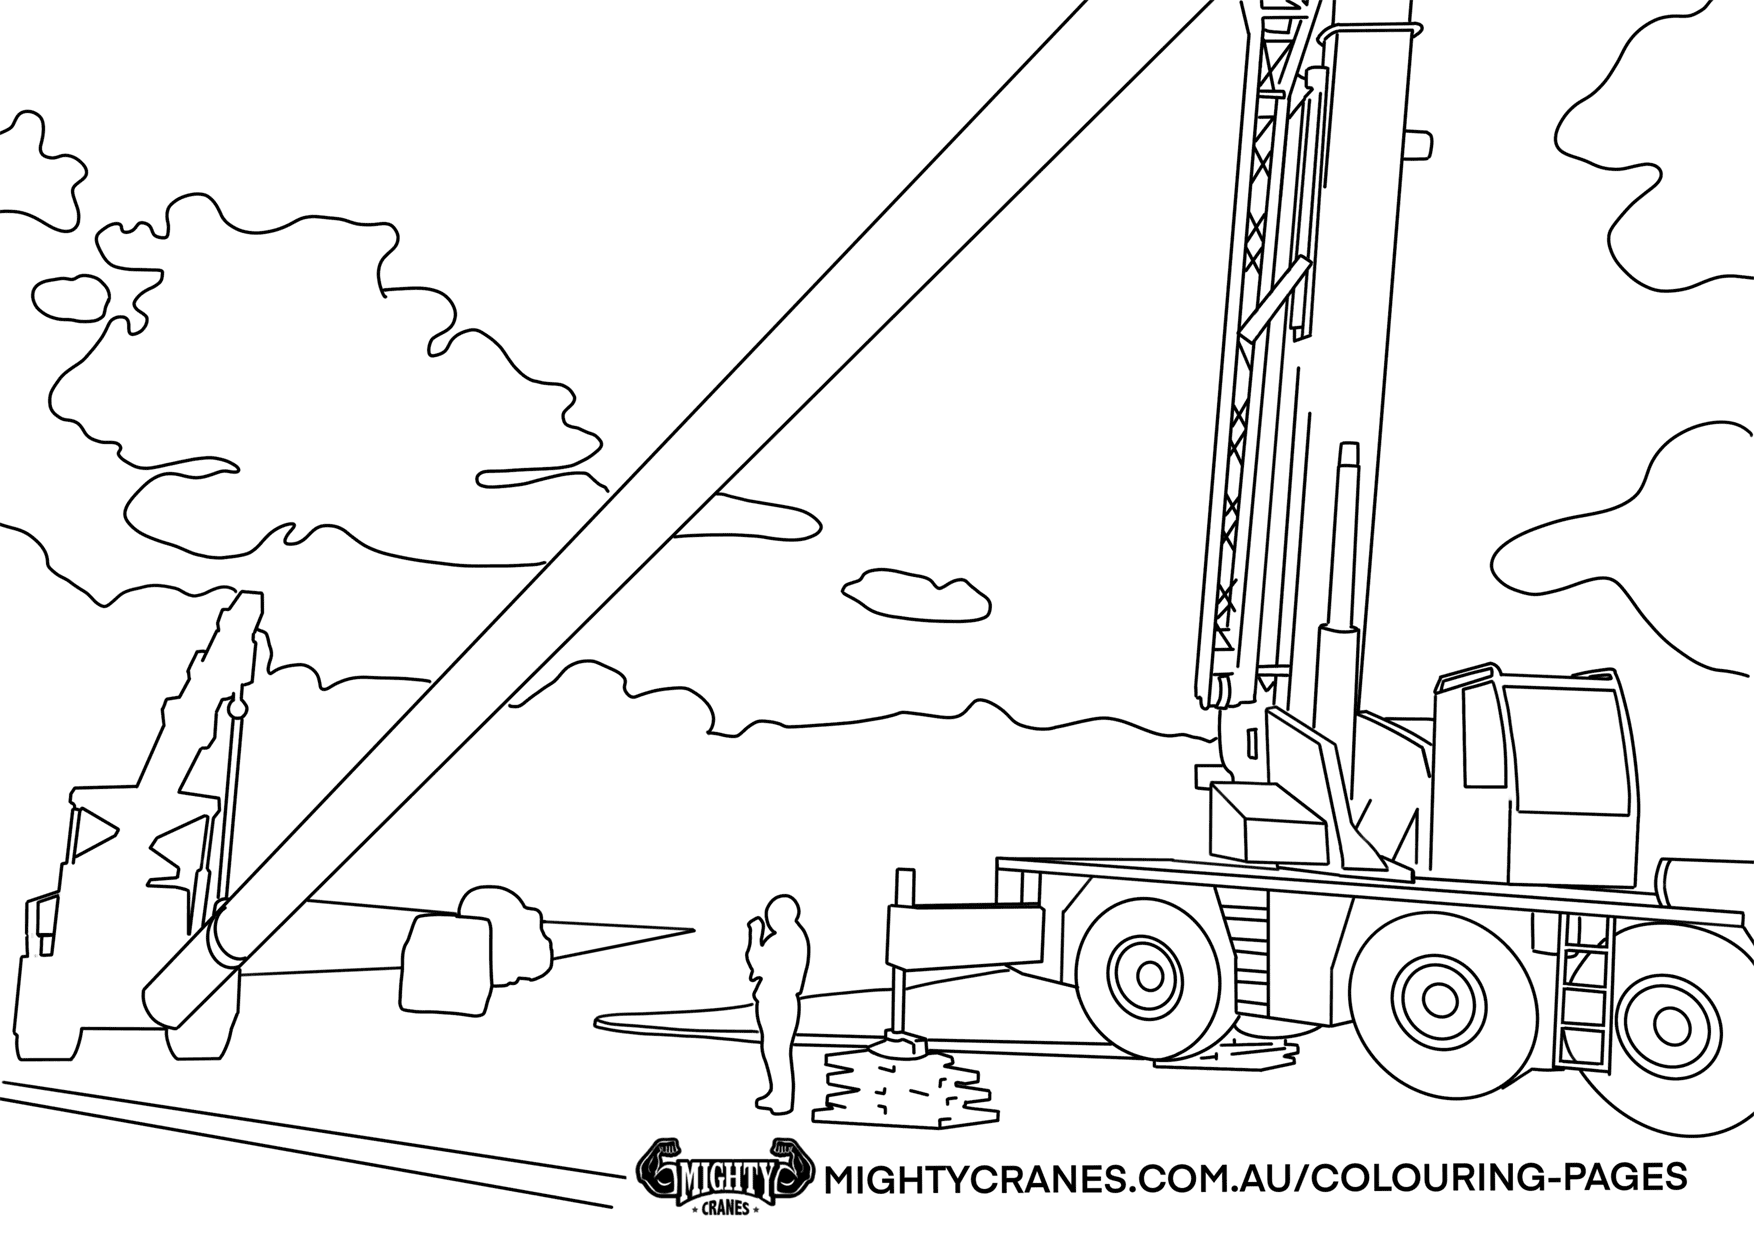 Construction Coloring Pages - Best Coloring Pages For Kids